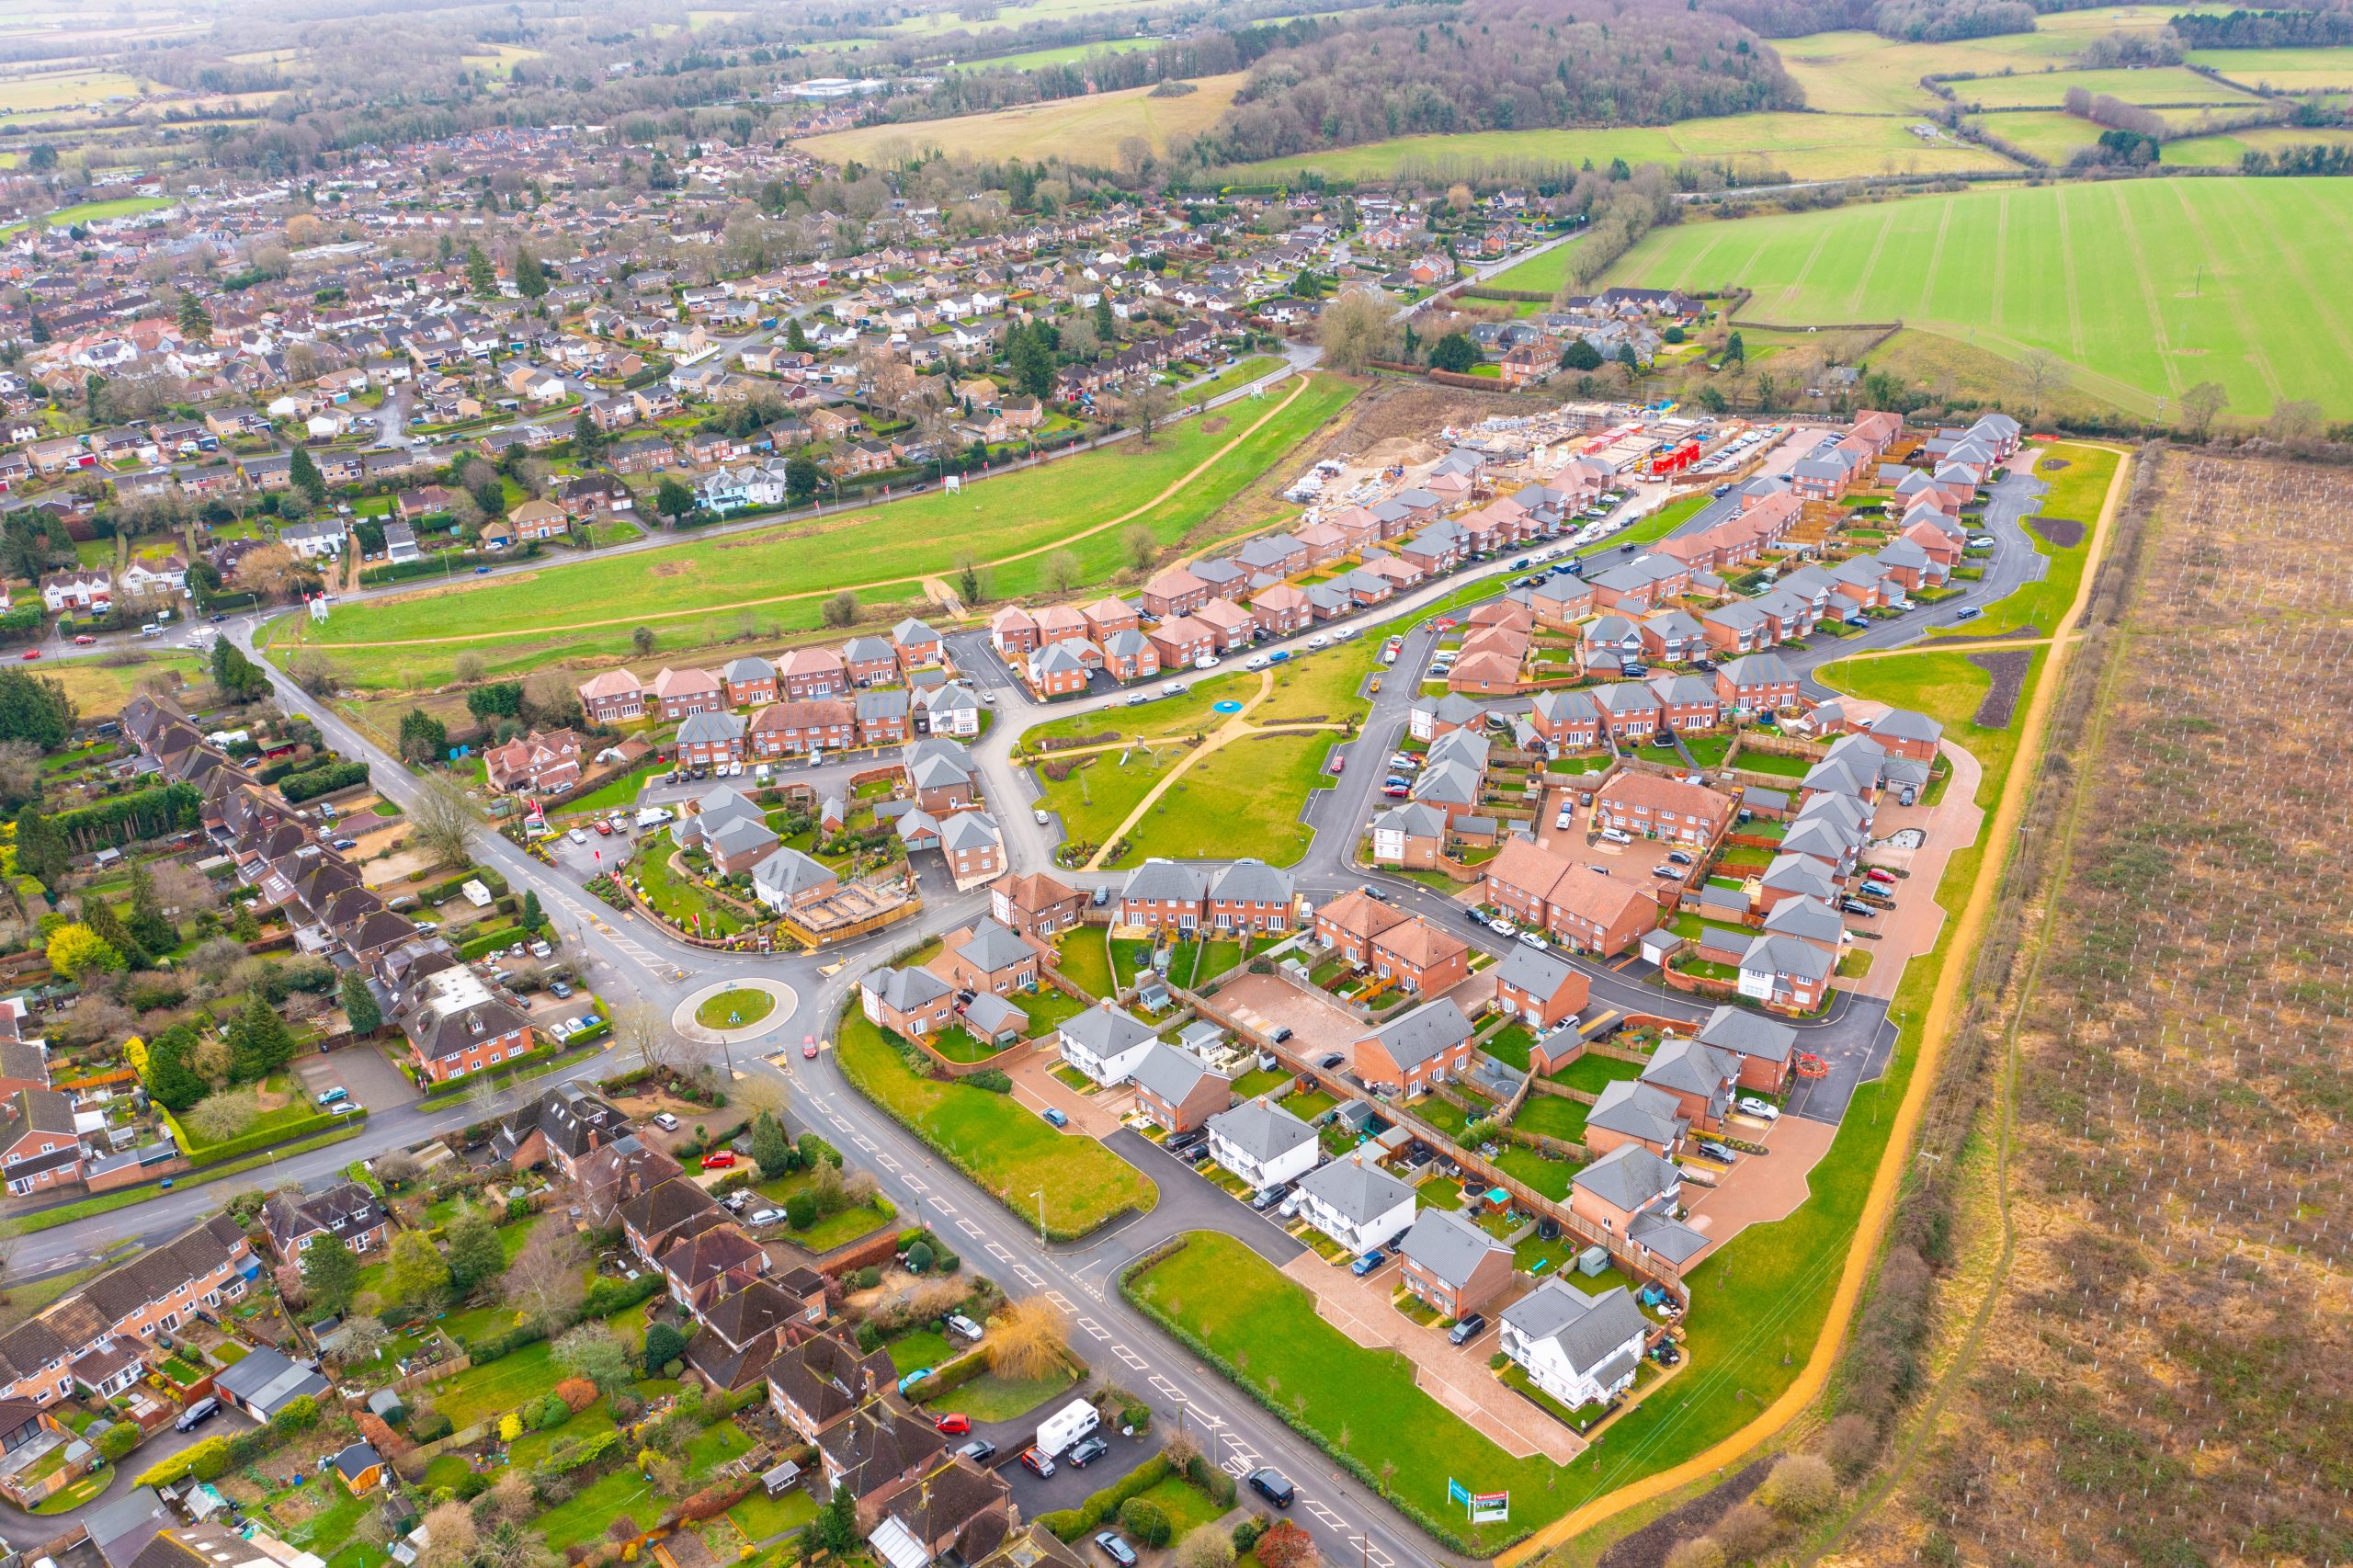 New homes in Alton, Hampshire promoted by Hallam Land. Aerial.